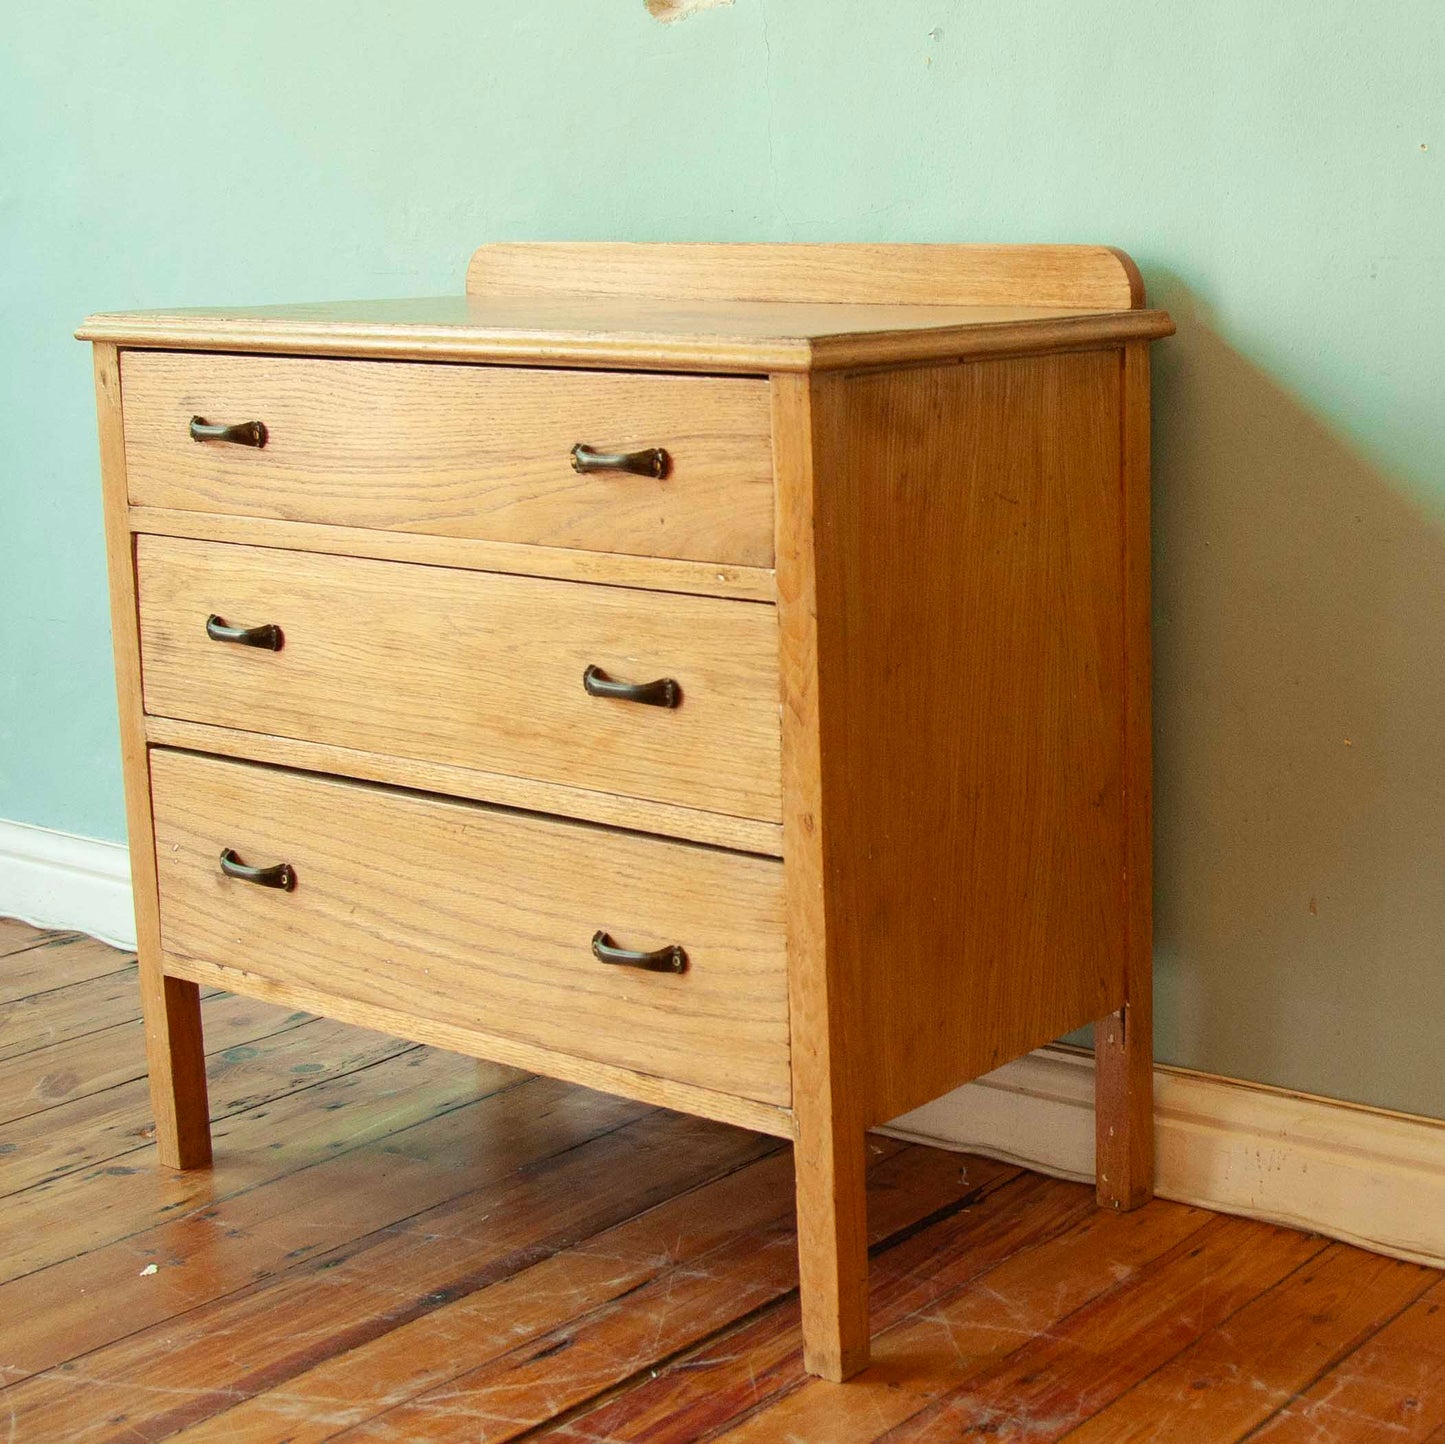 Small chest of drawers